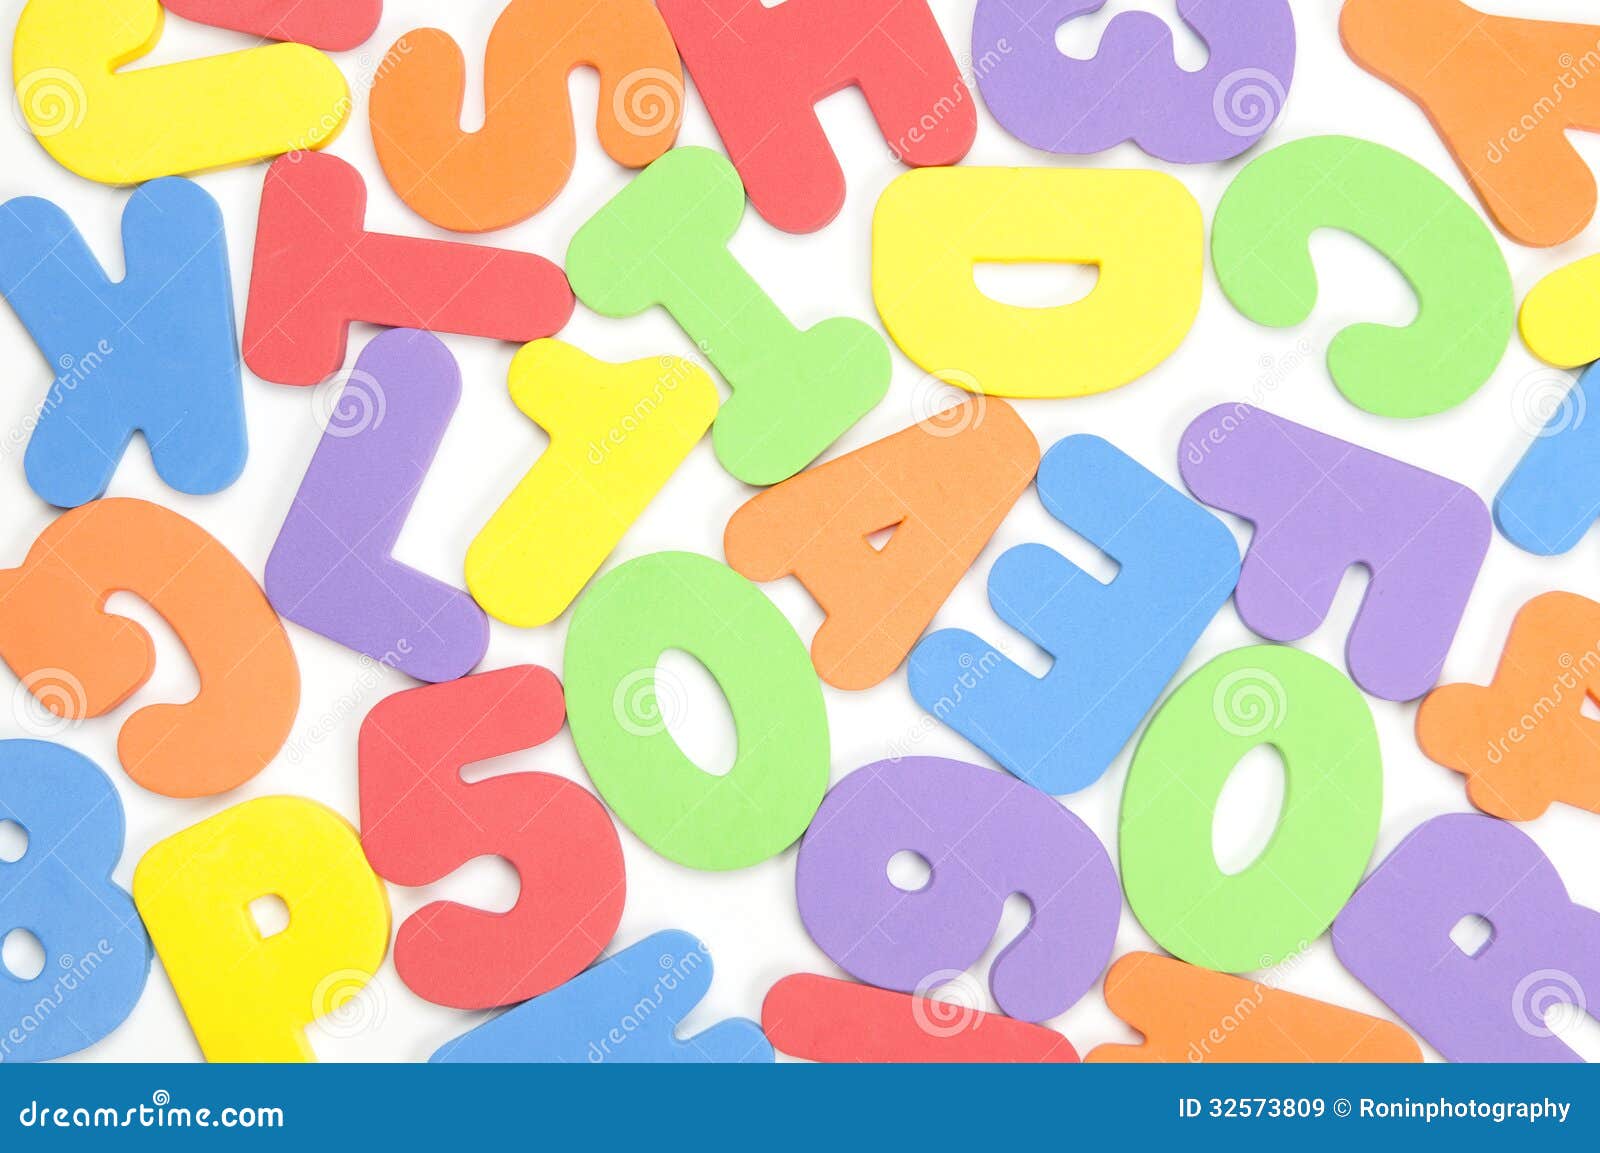 Foam Numbers And Letters Royalty Free Stock Images - Image: 32573809